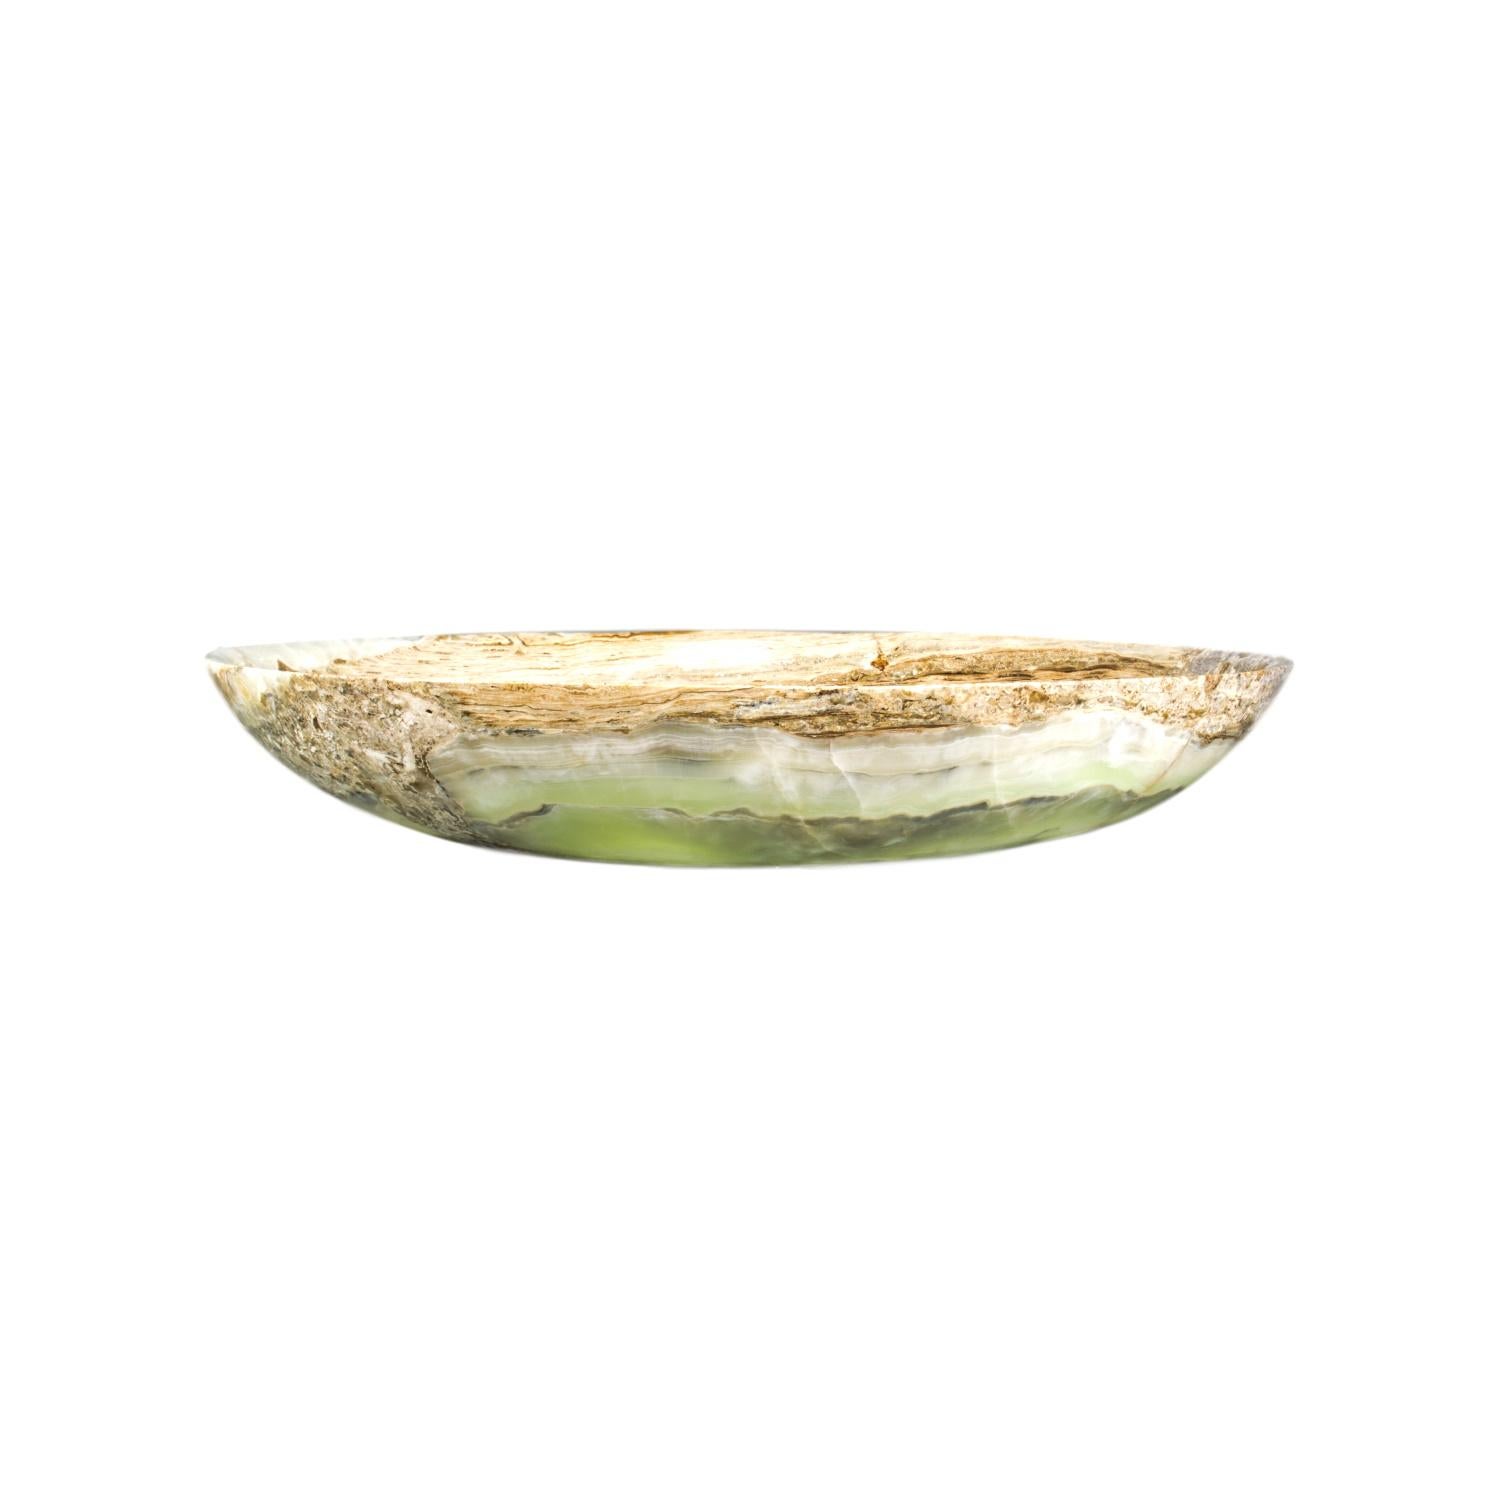 Handcrafted multi green round onyx bowl, beautifully carved from a single piece of high quality genuine onyx gemstone - each unique onyx stone bowl blends natural onyx shades of green, white, honey, brown and burgundy tones. Richly polished for a